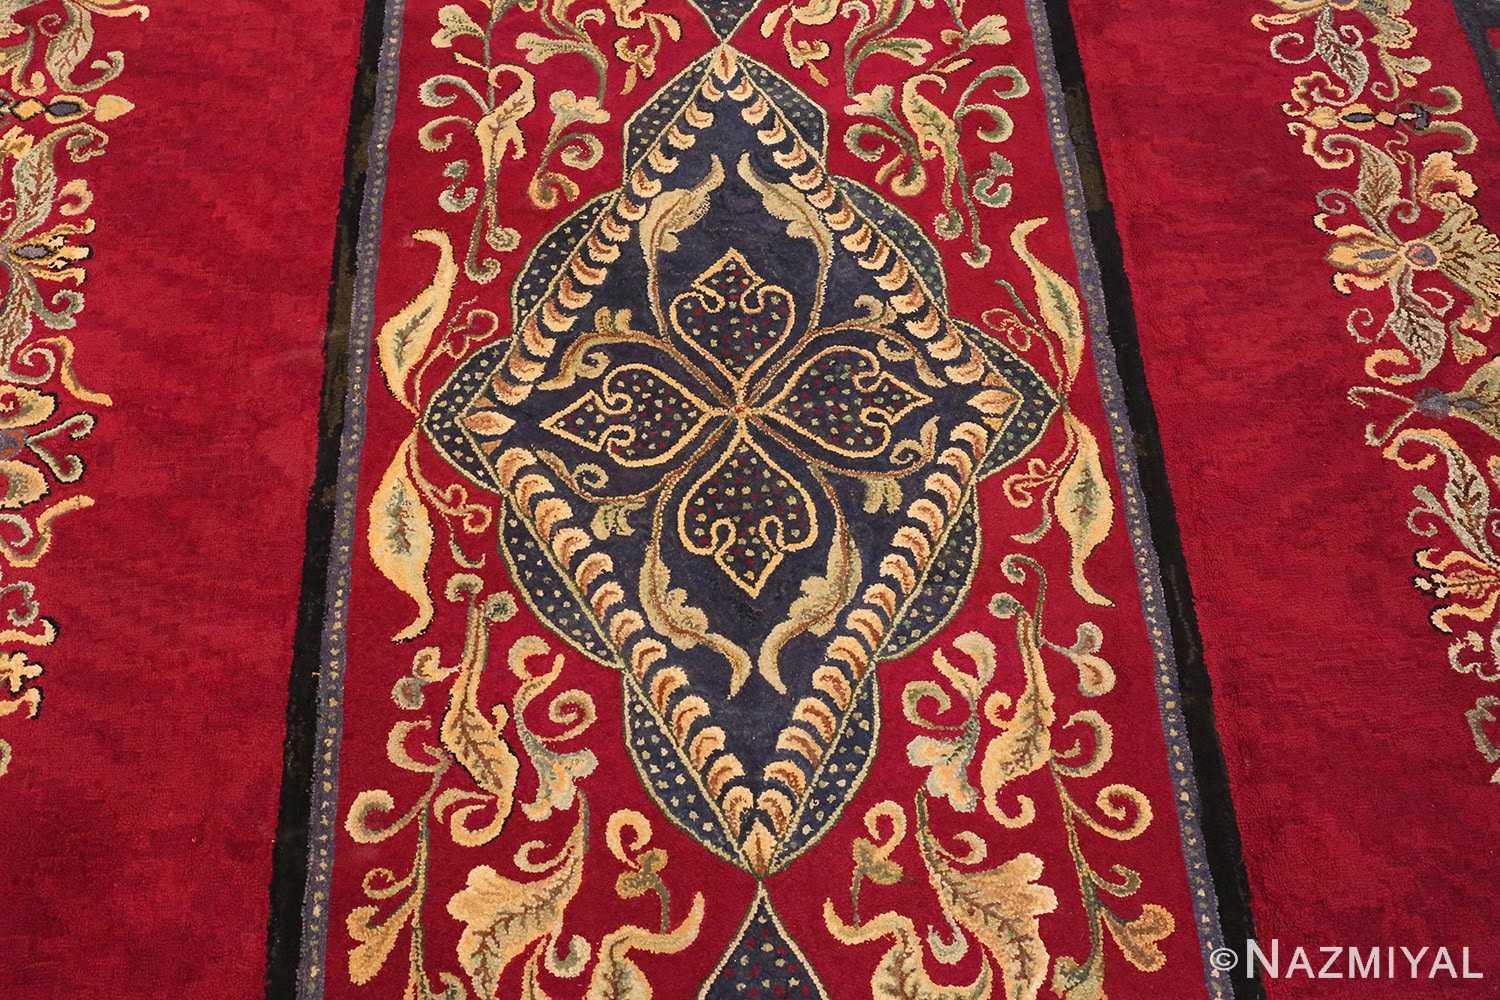 Picture of the central medallion design of the red Medallion Design Antique American Hooked Rug #70059 from Nazmiyal Antique Rugs in NYC